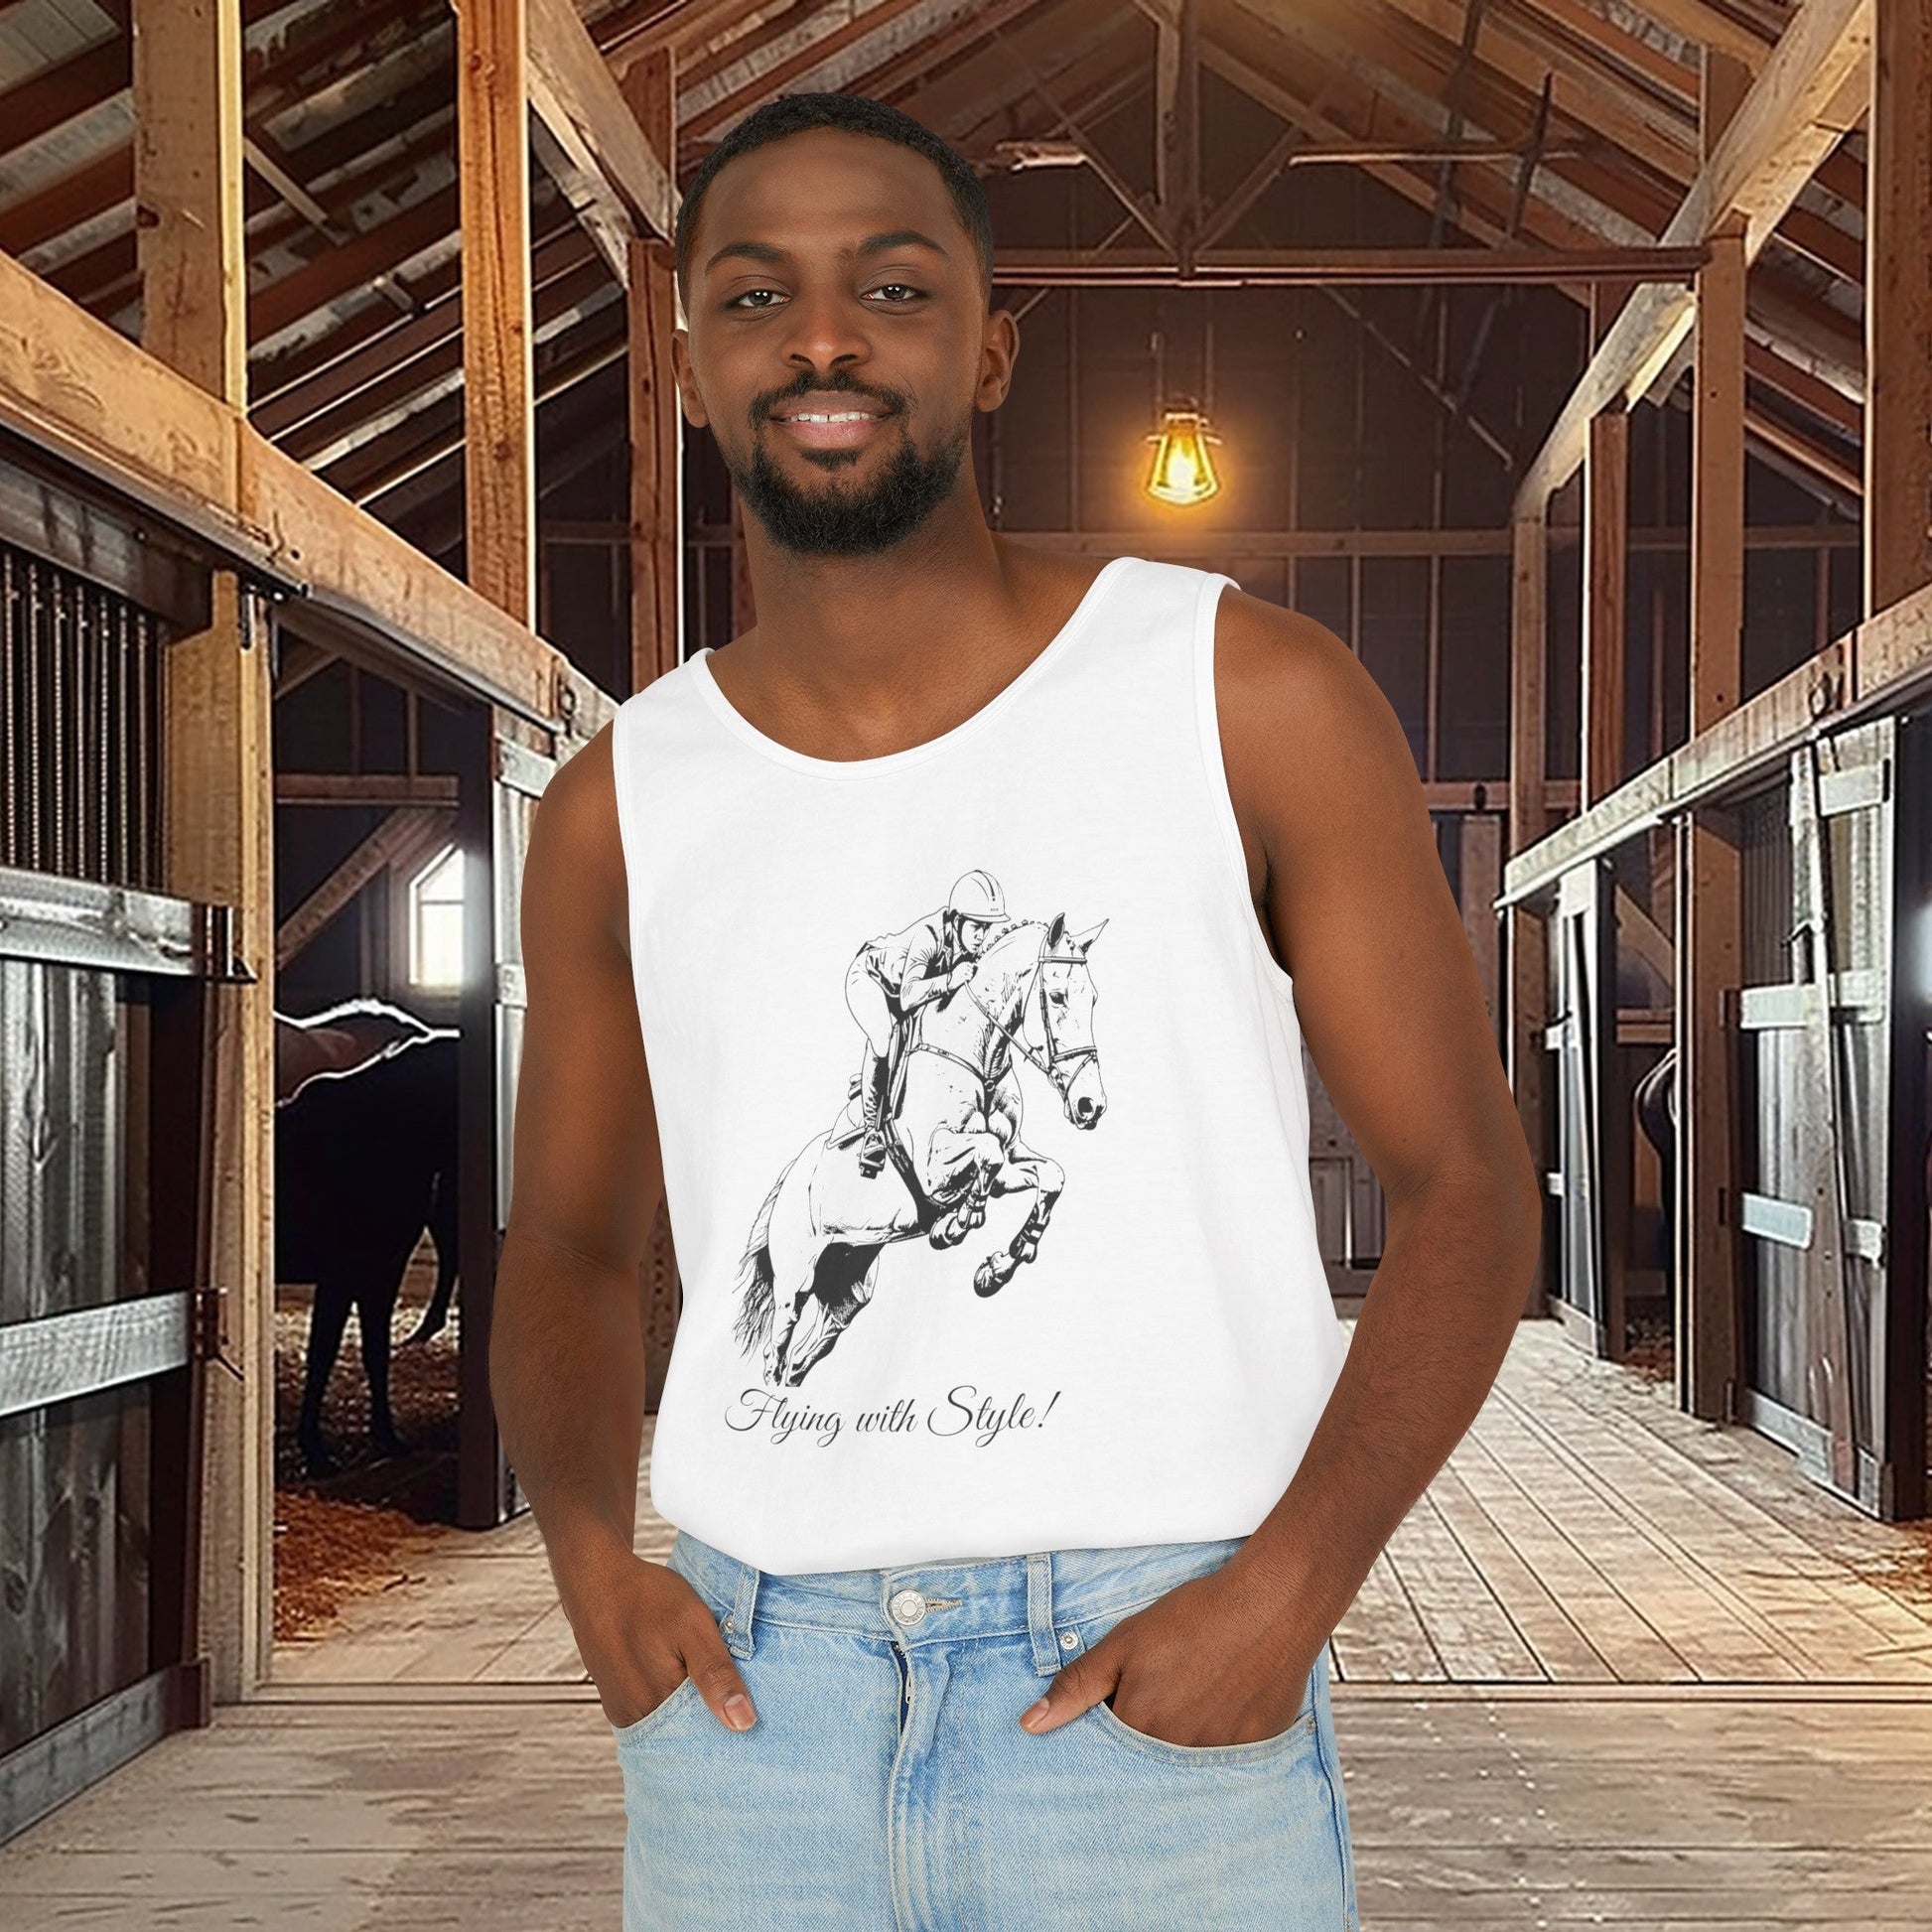 Comfort Color Hunter Jumper Tank Top, "Fly with Style" Horse Show - FlooredByArt